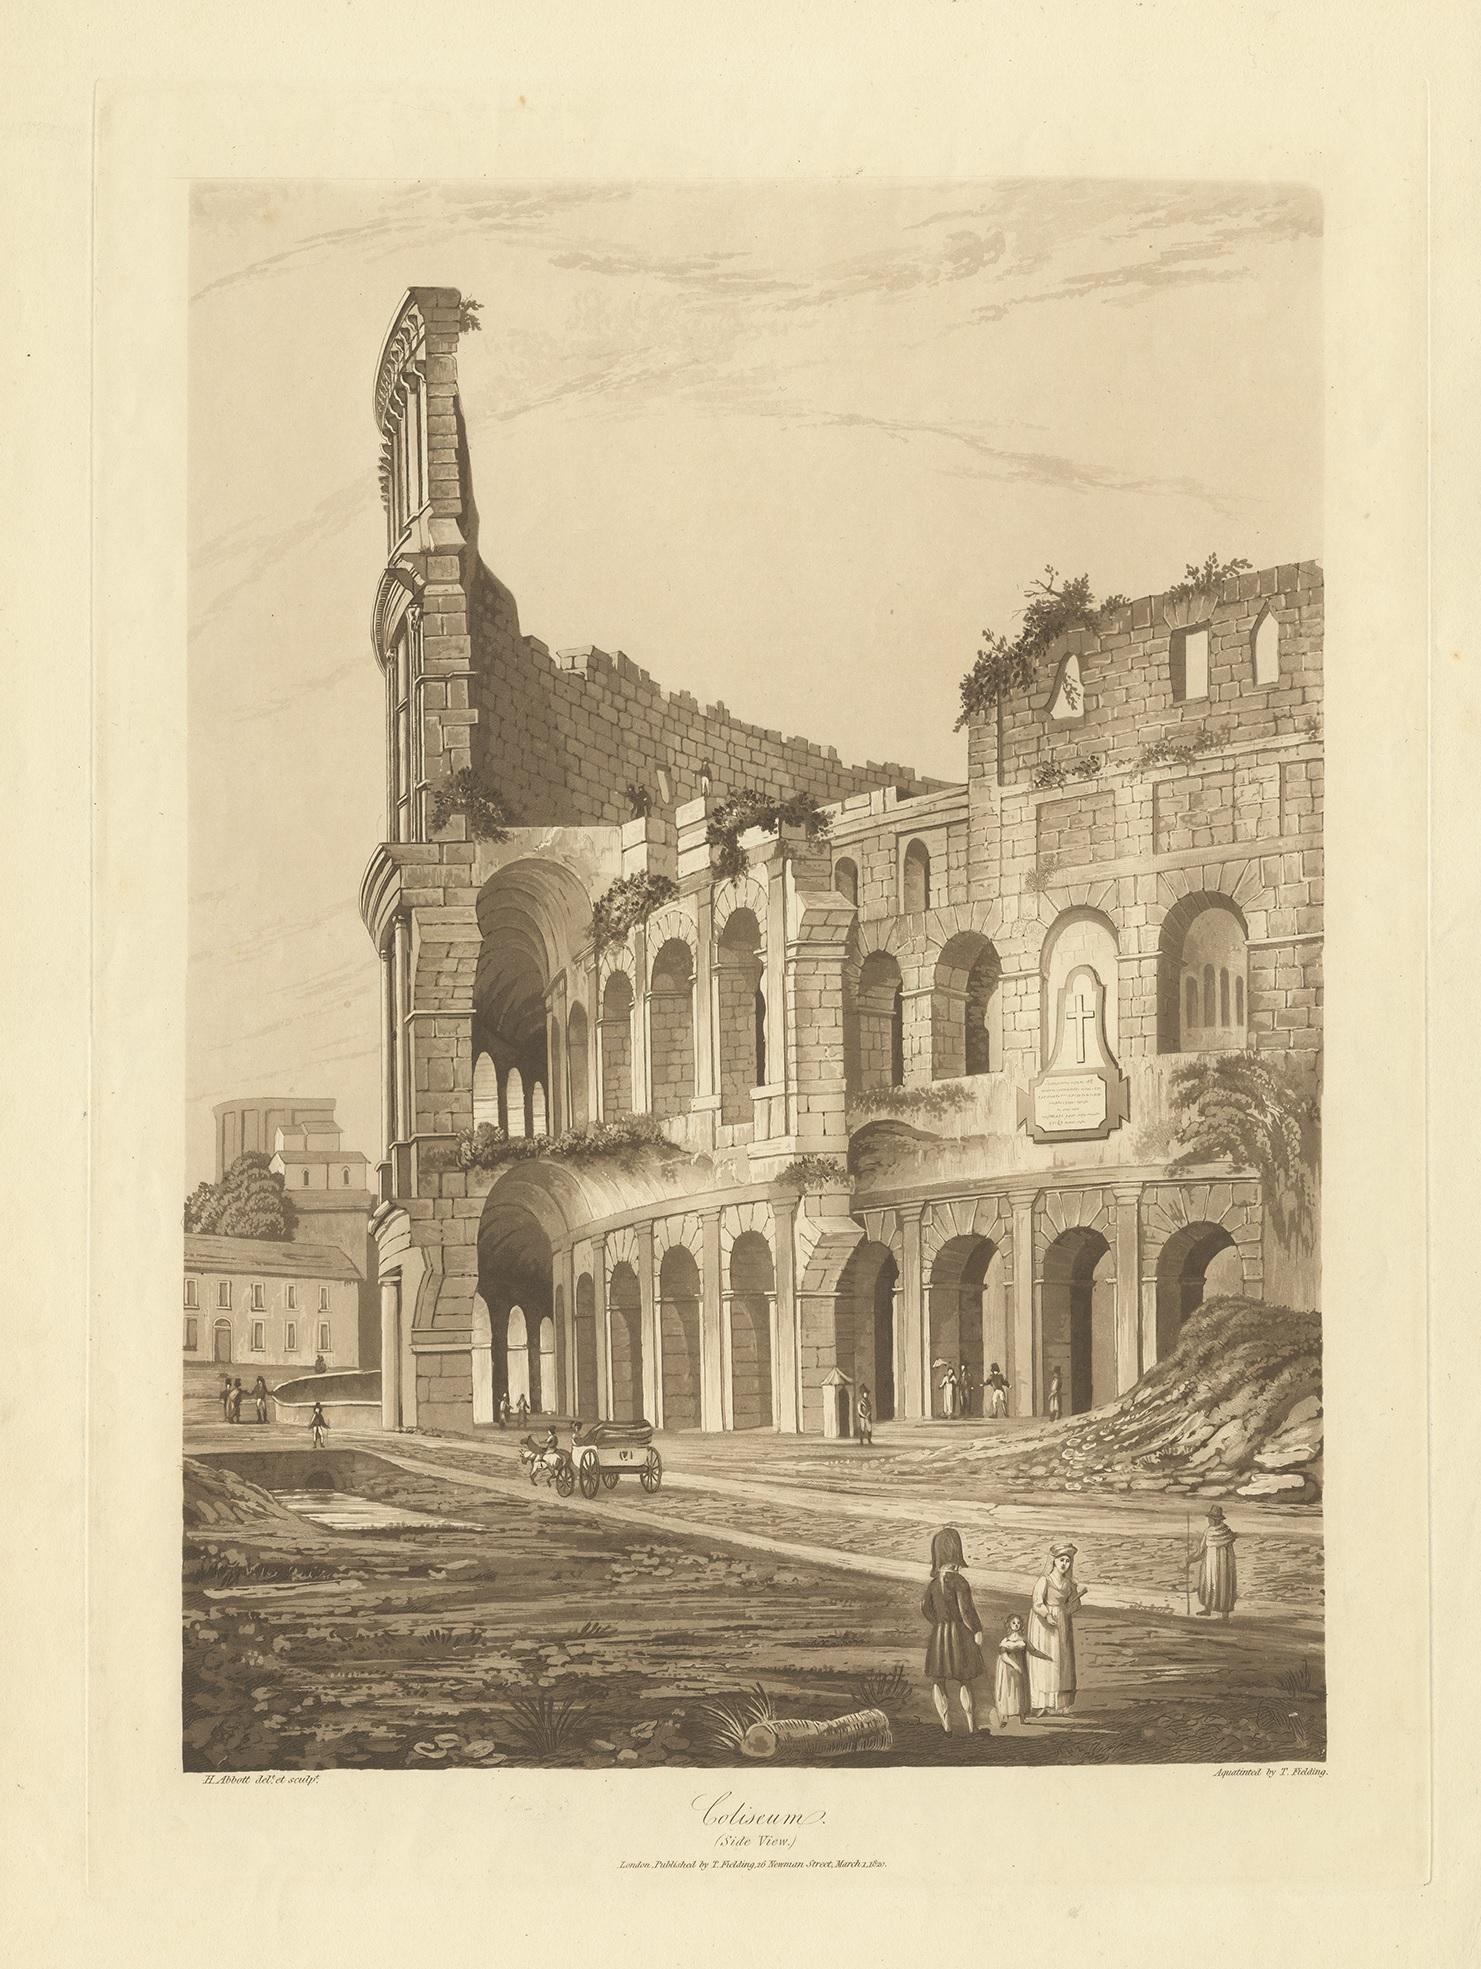 Antique print titled 'Coliseum, side view'. Large aquatint of the Colosseum. The Colosseum or Coliseum, also known as the Flavian Amphitheatre, is an oval amphitheatre in the centre of the city of Rome, Italy. 

This print originates from '